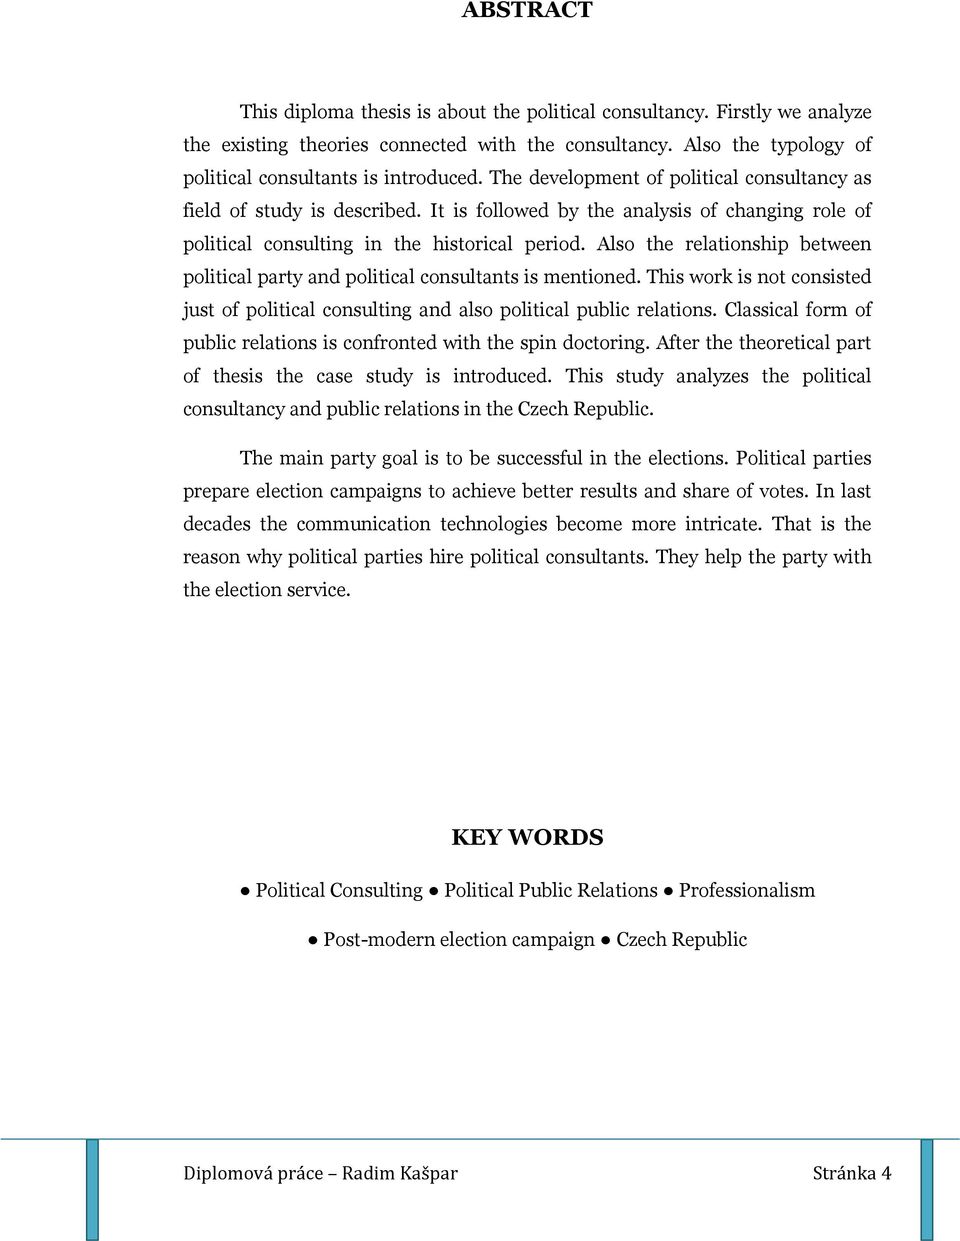 Also the relationship between political party and political consultants is mentioned. This work is not consisted just of political consulting and also political public relations.